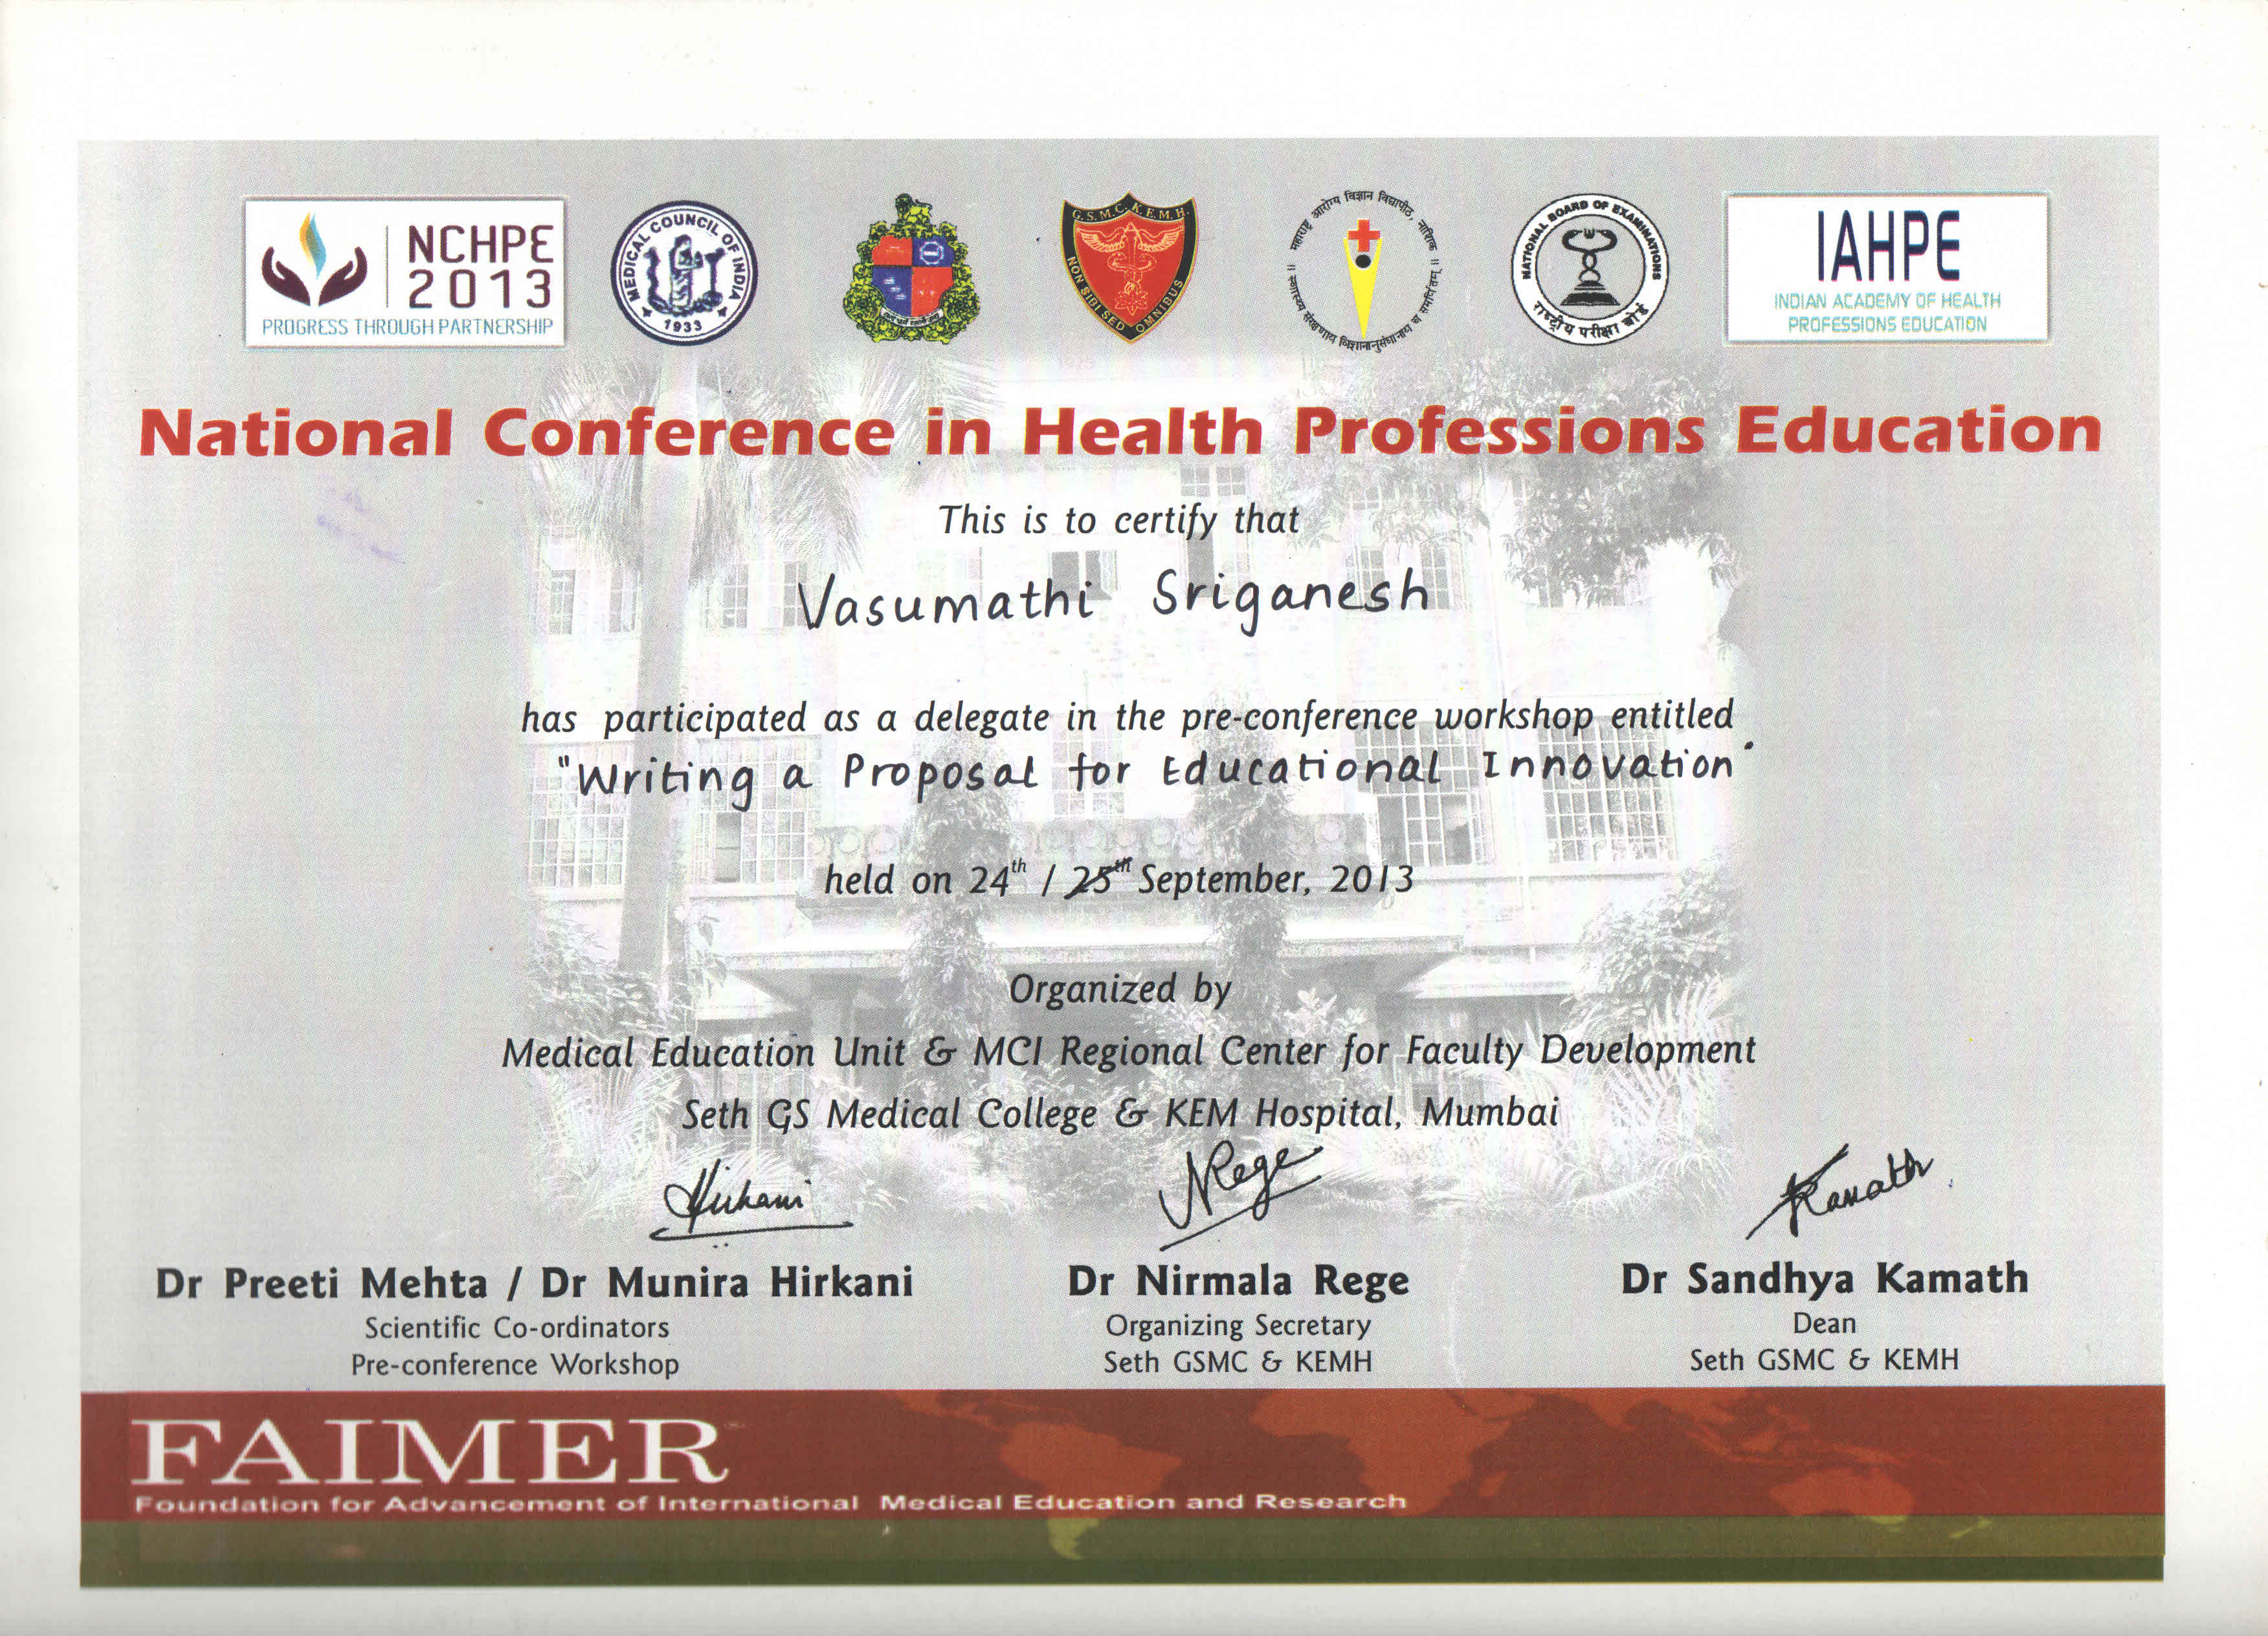 FAIMER-National Conference in Health Professions Education-Lecture